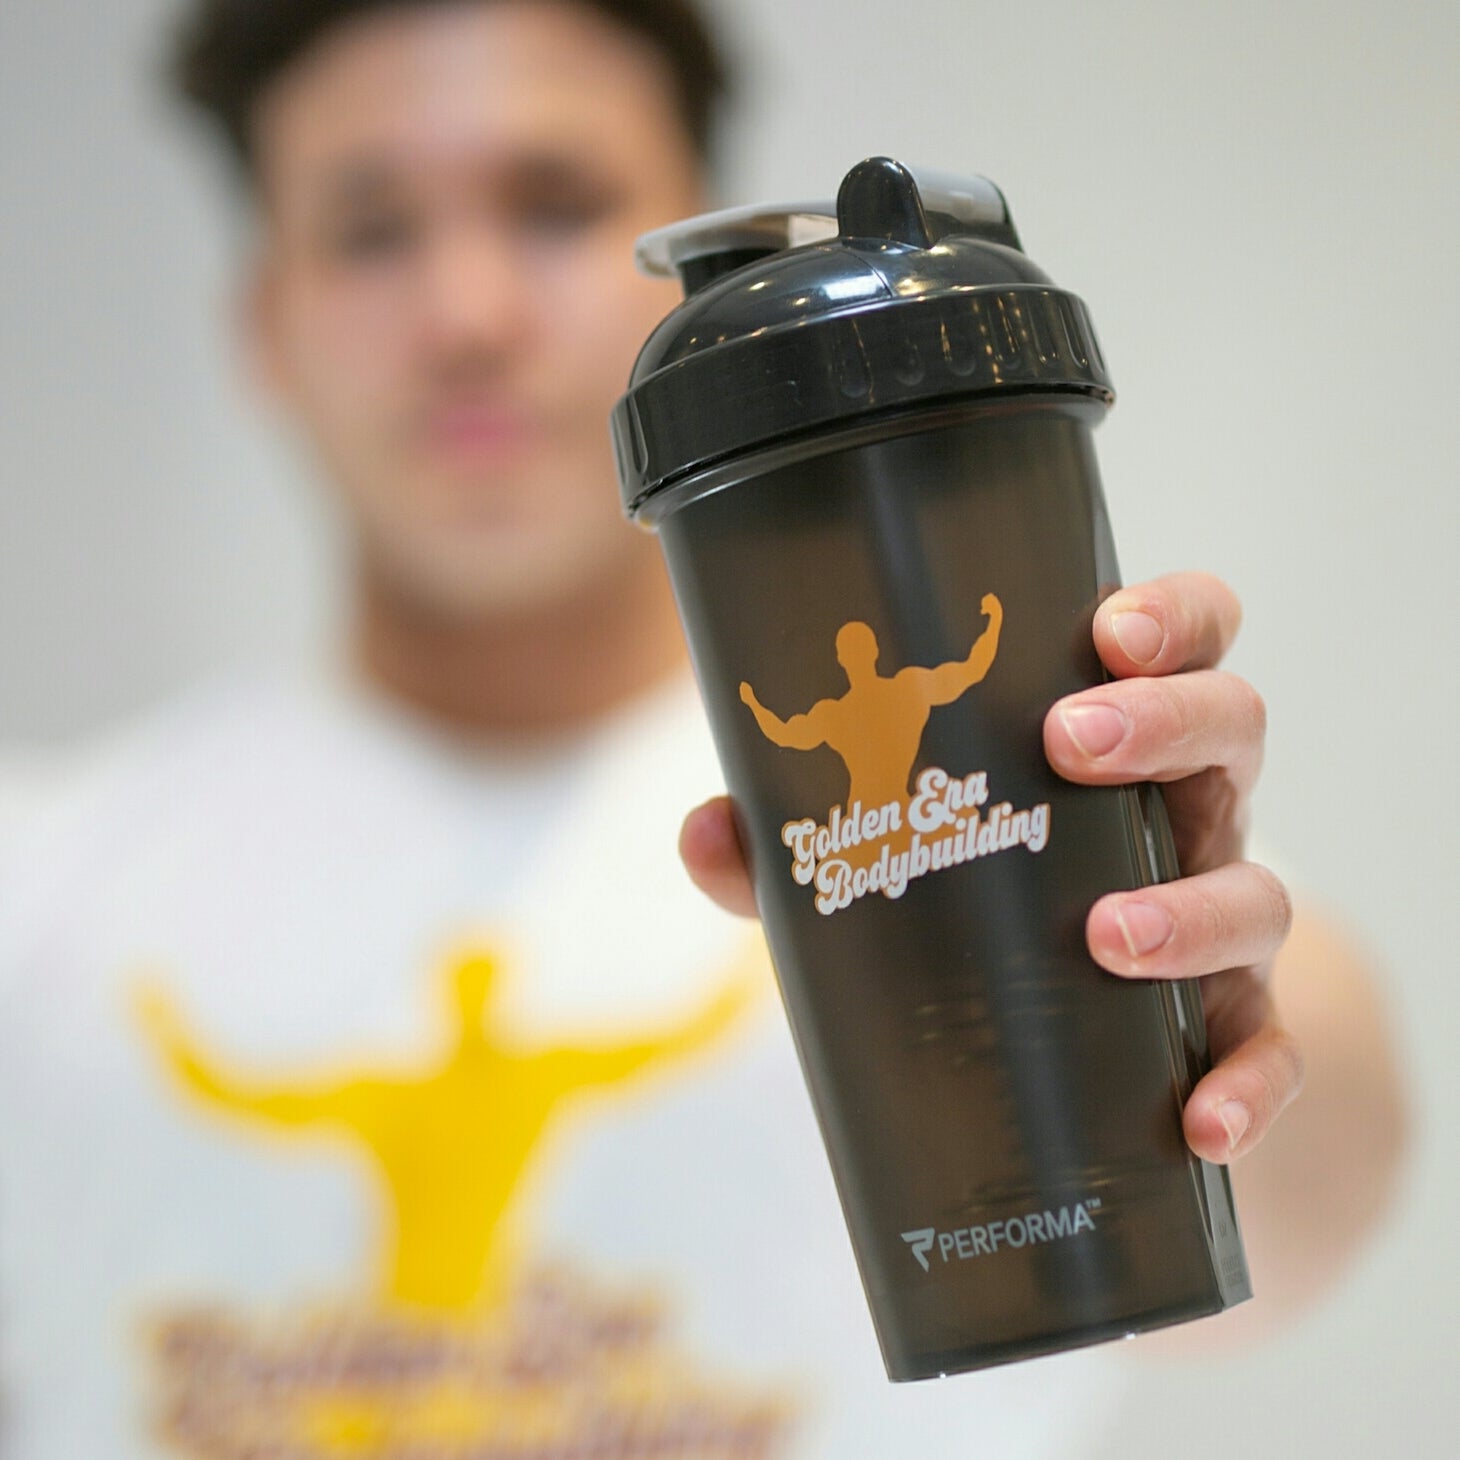 Limited Edition Golden Era Shaker, Free with text signup!